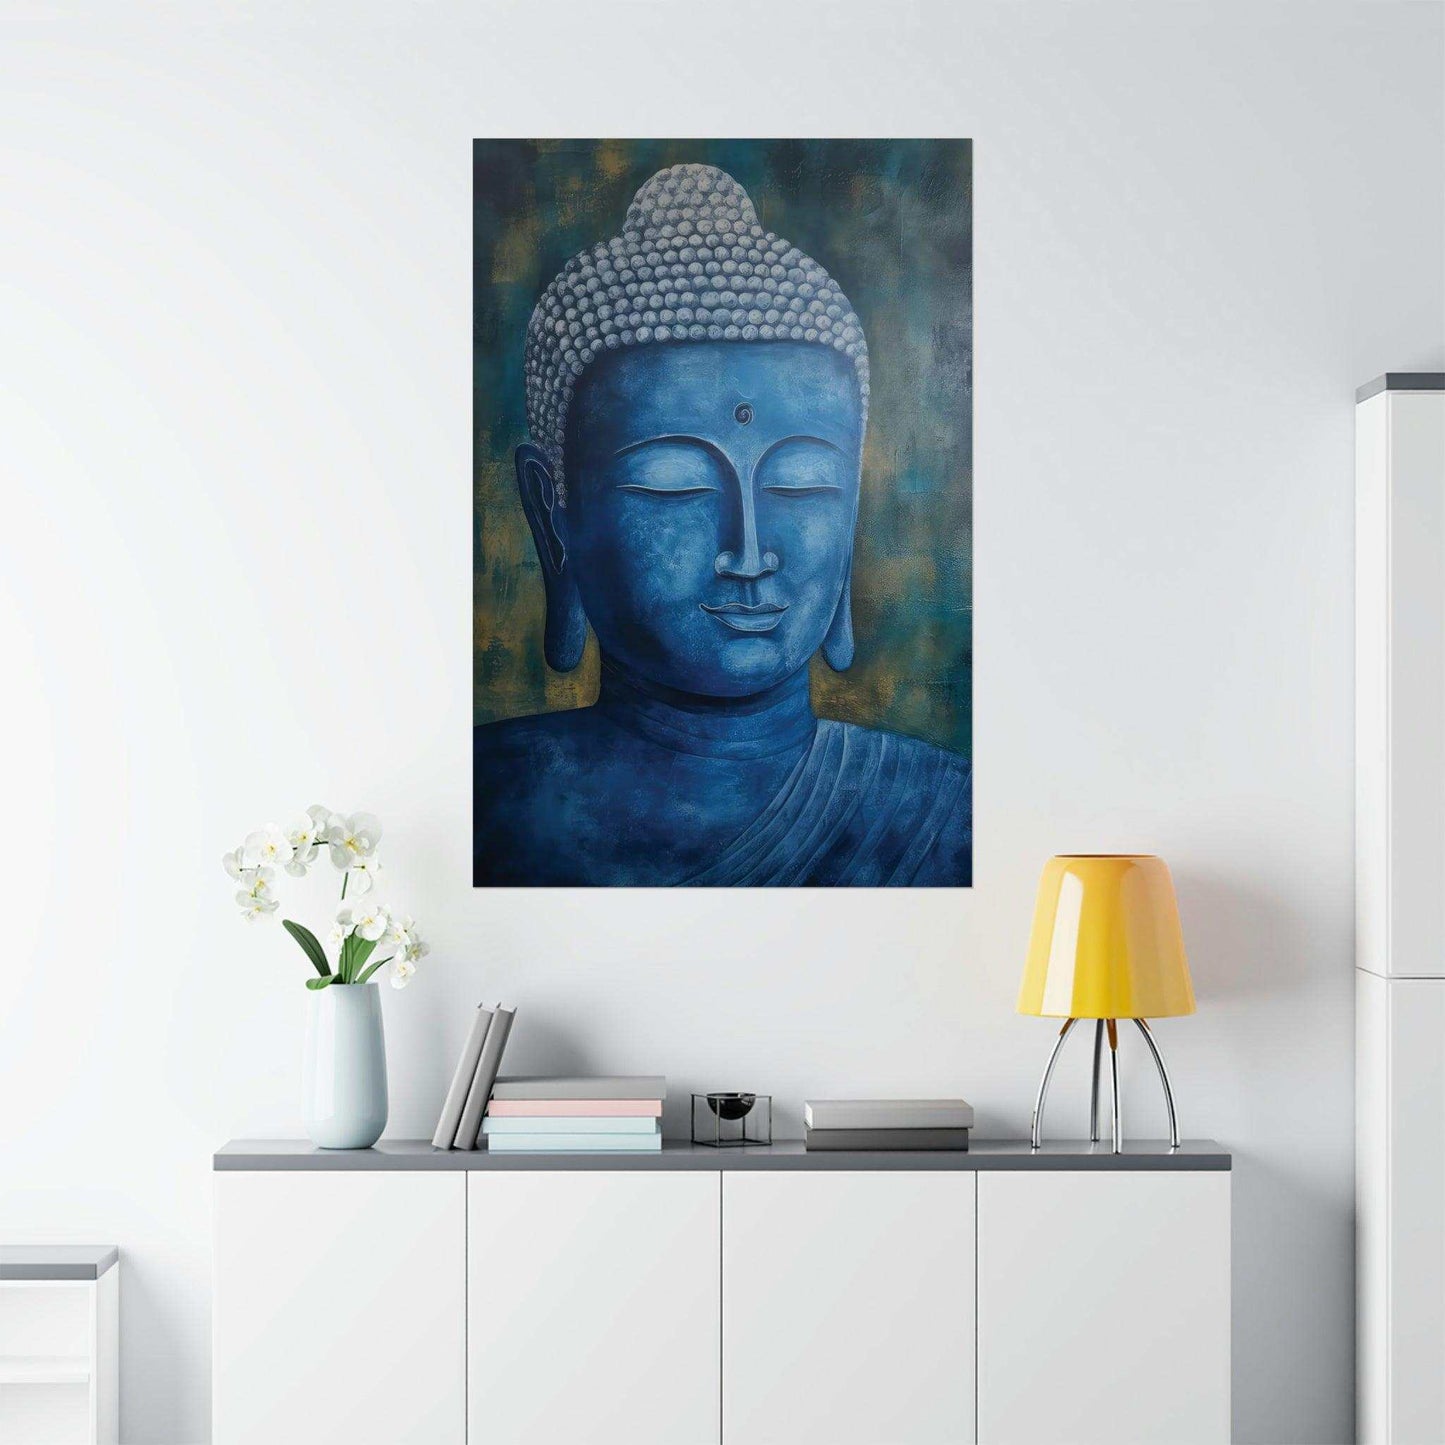 Oklahoma Zen Artwork from ZenArtBliss.com, featuring a serene Buddha in abstract blue tones, printed on matte paper for a sophisticated look.